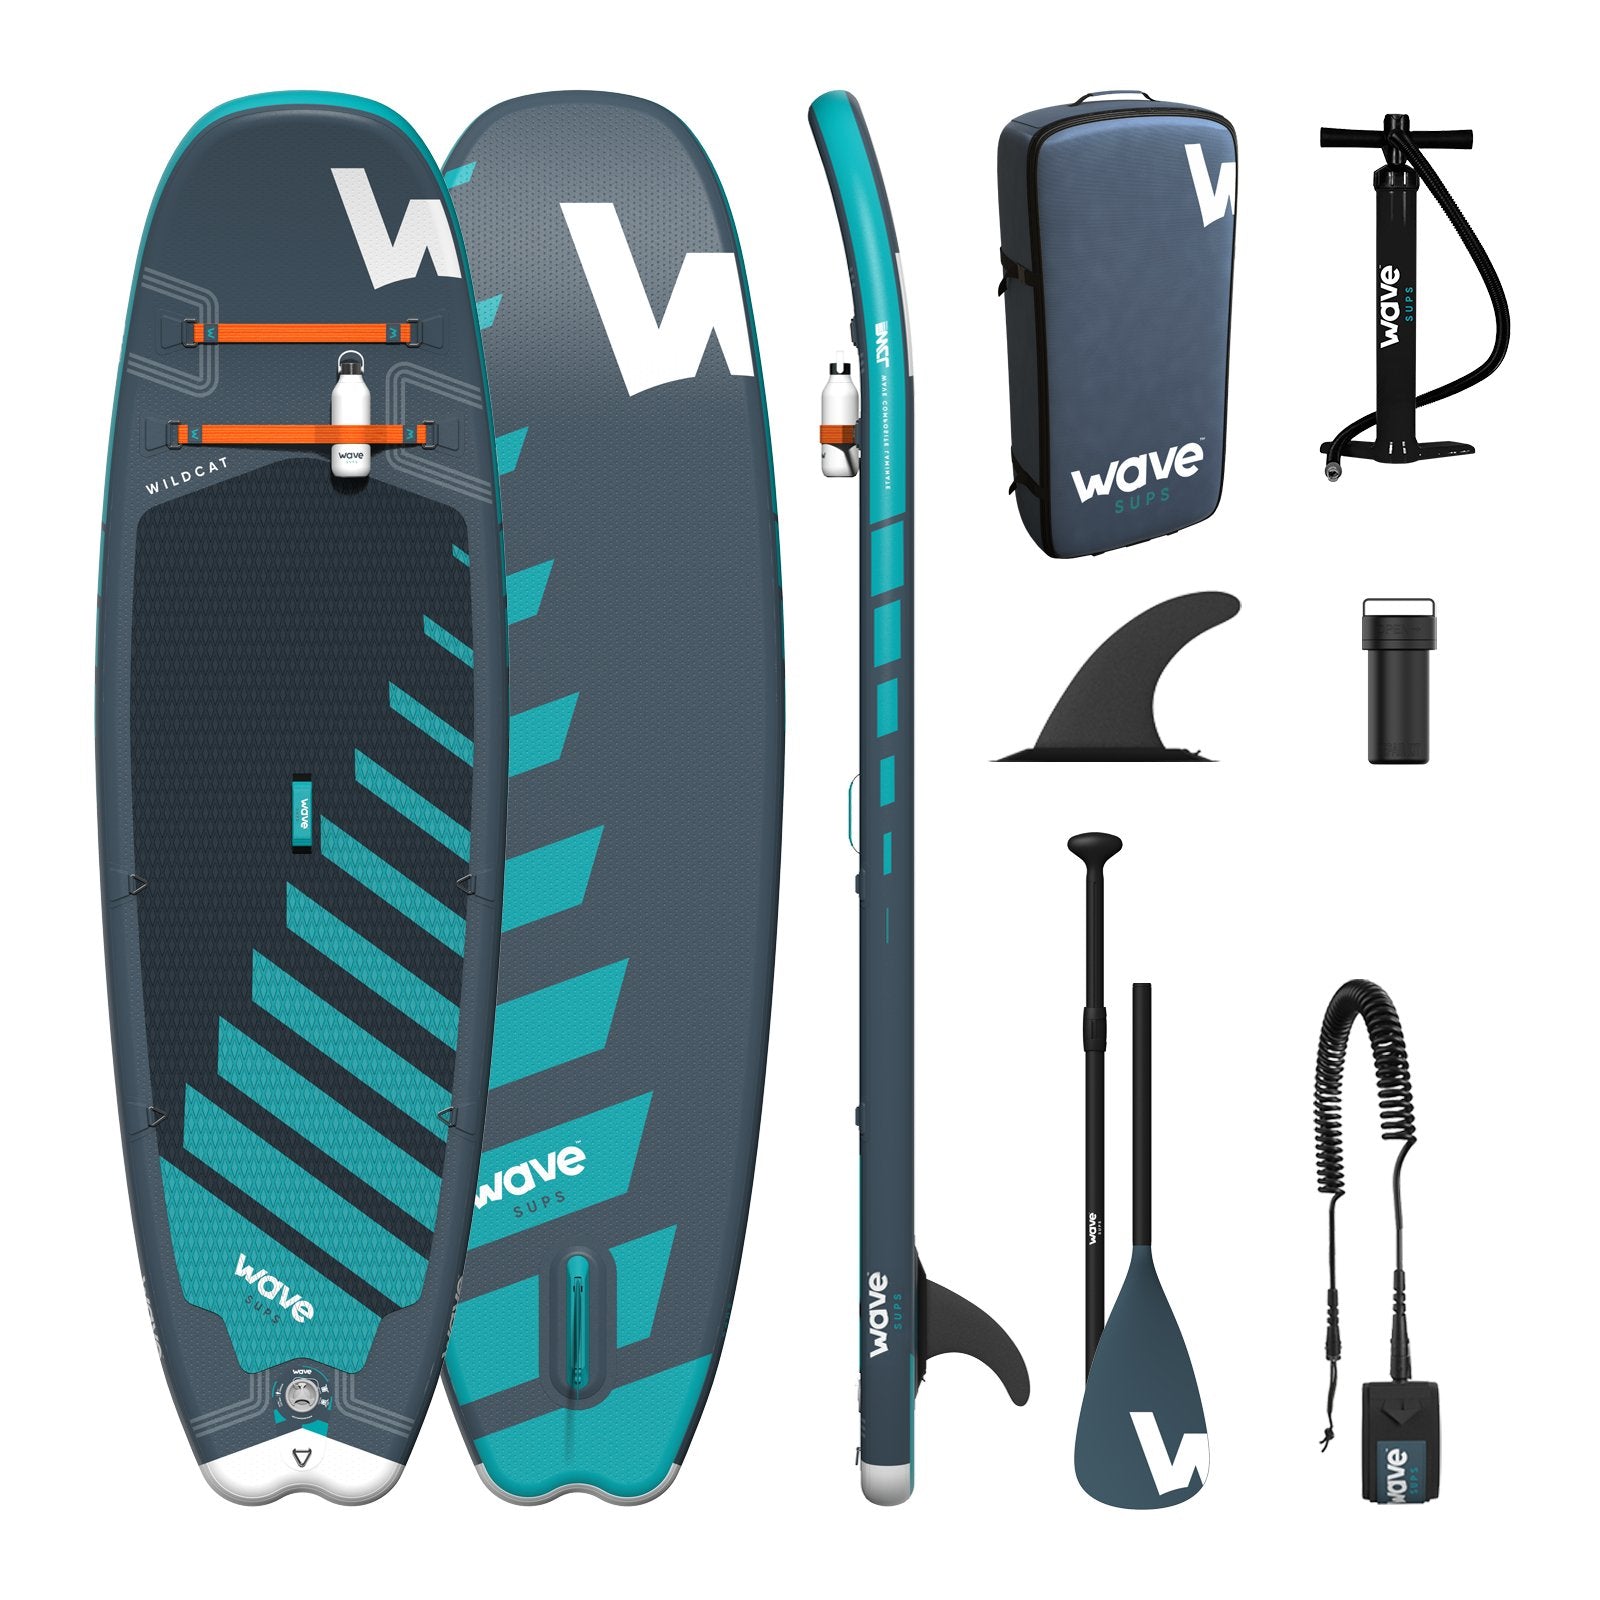 Wildcat SUP | Inflatable Stand-Up Paddleboard | 8.6ft | Navy - Wave Sups EU